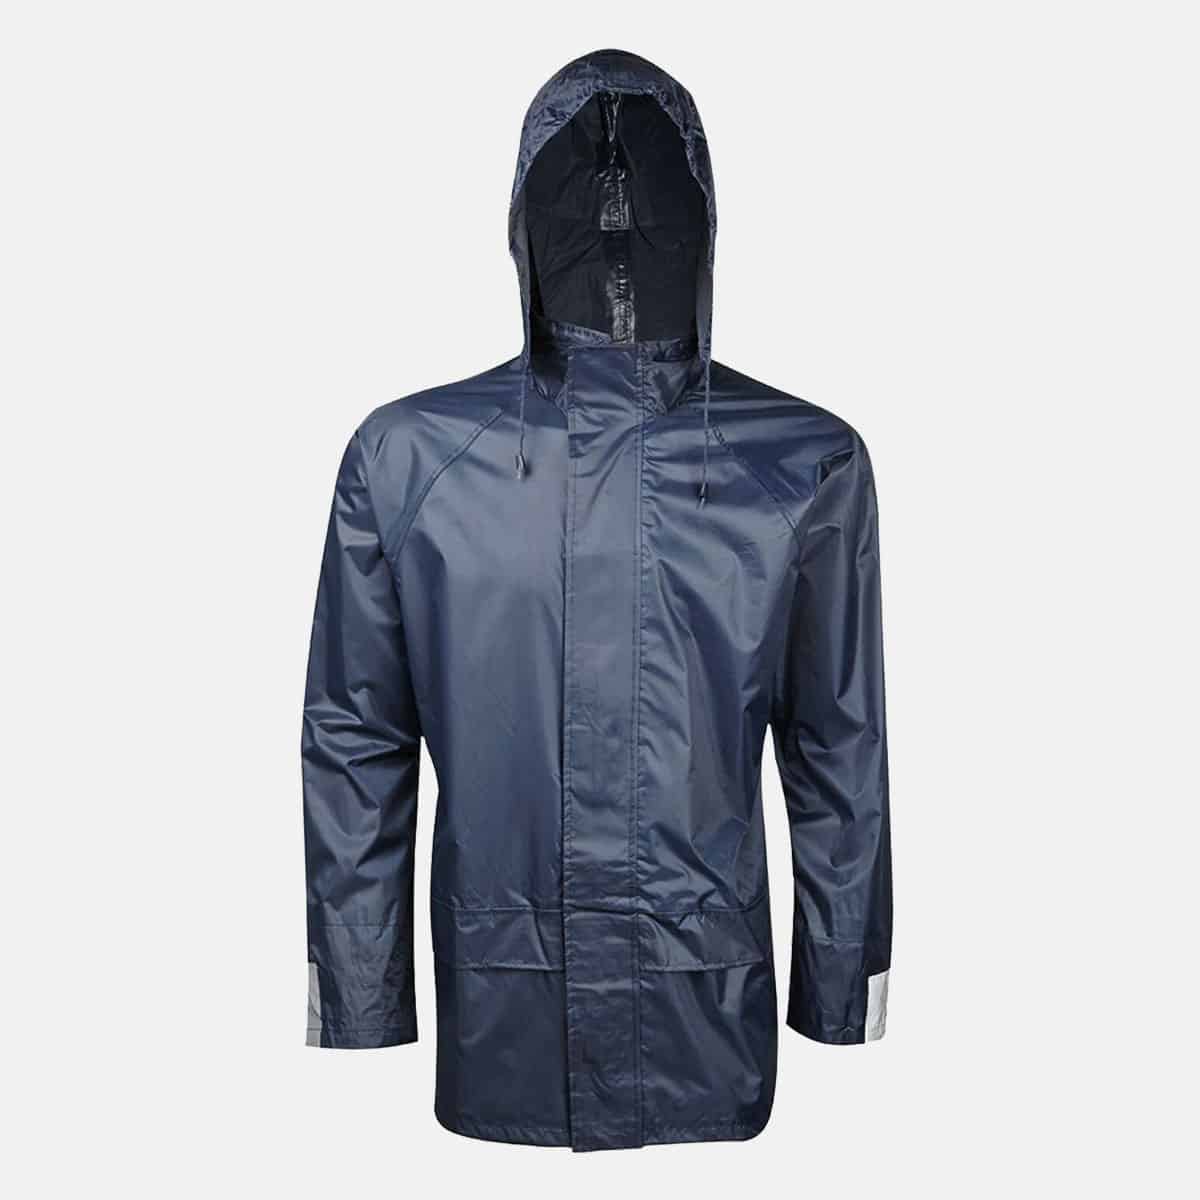 Adults Navy Blue Waterproof Jacket by Baum Country